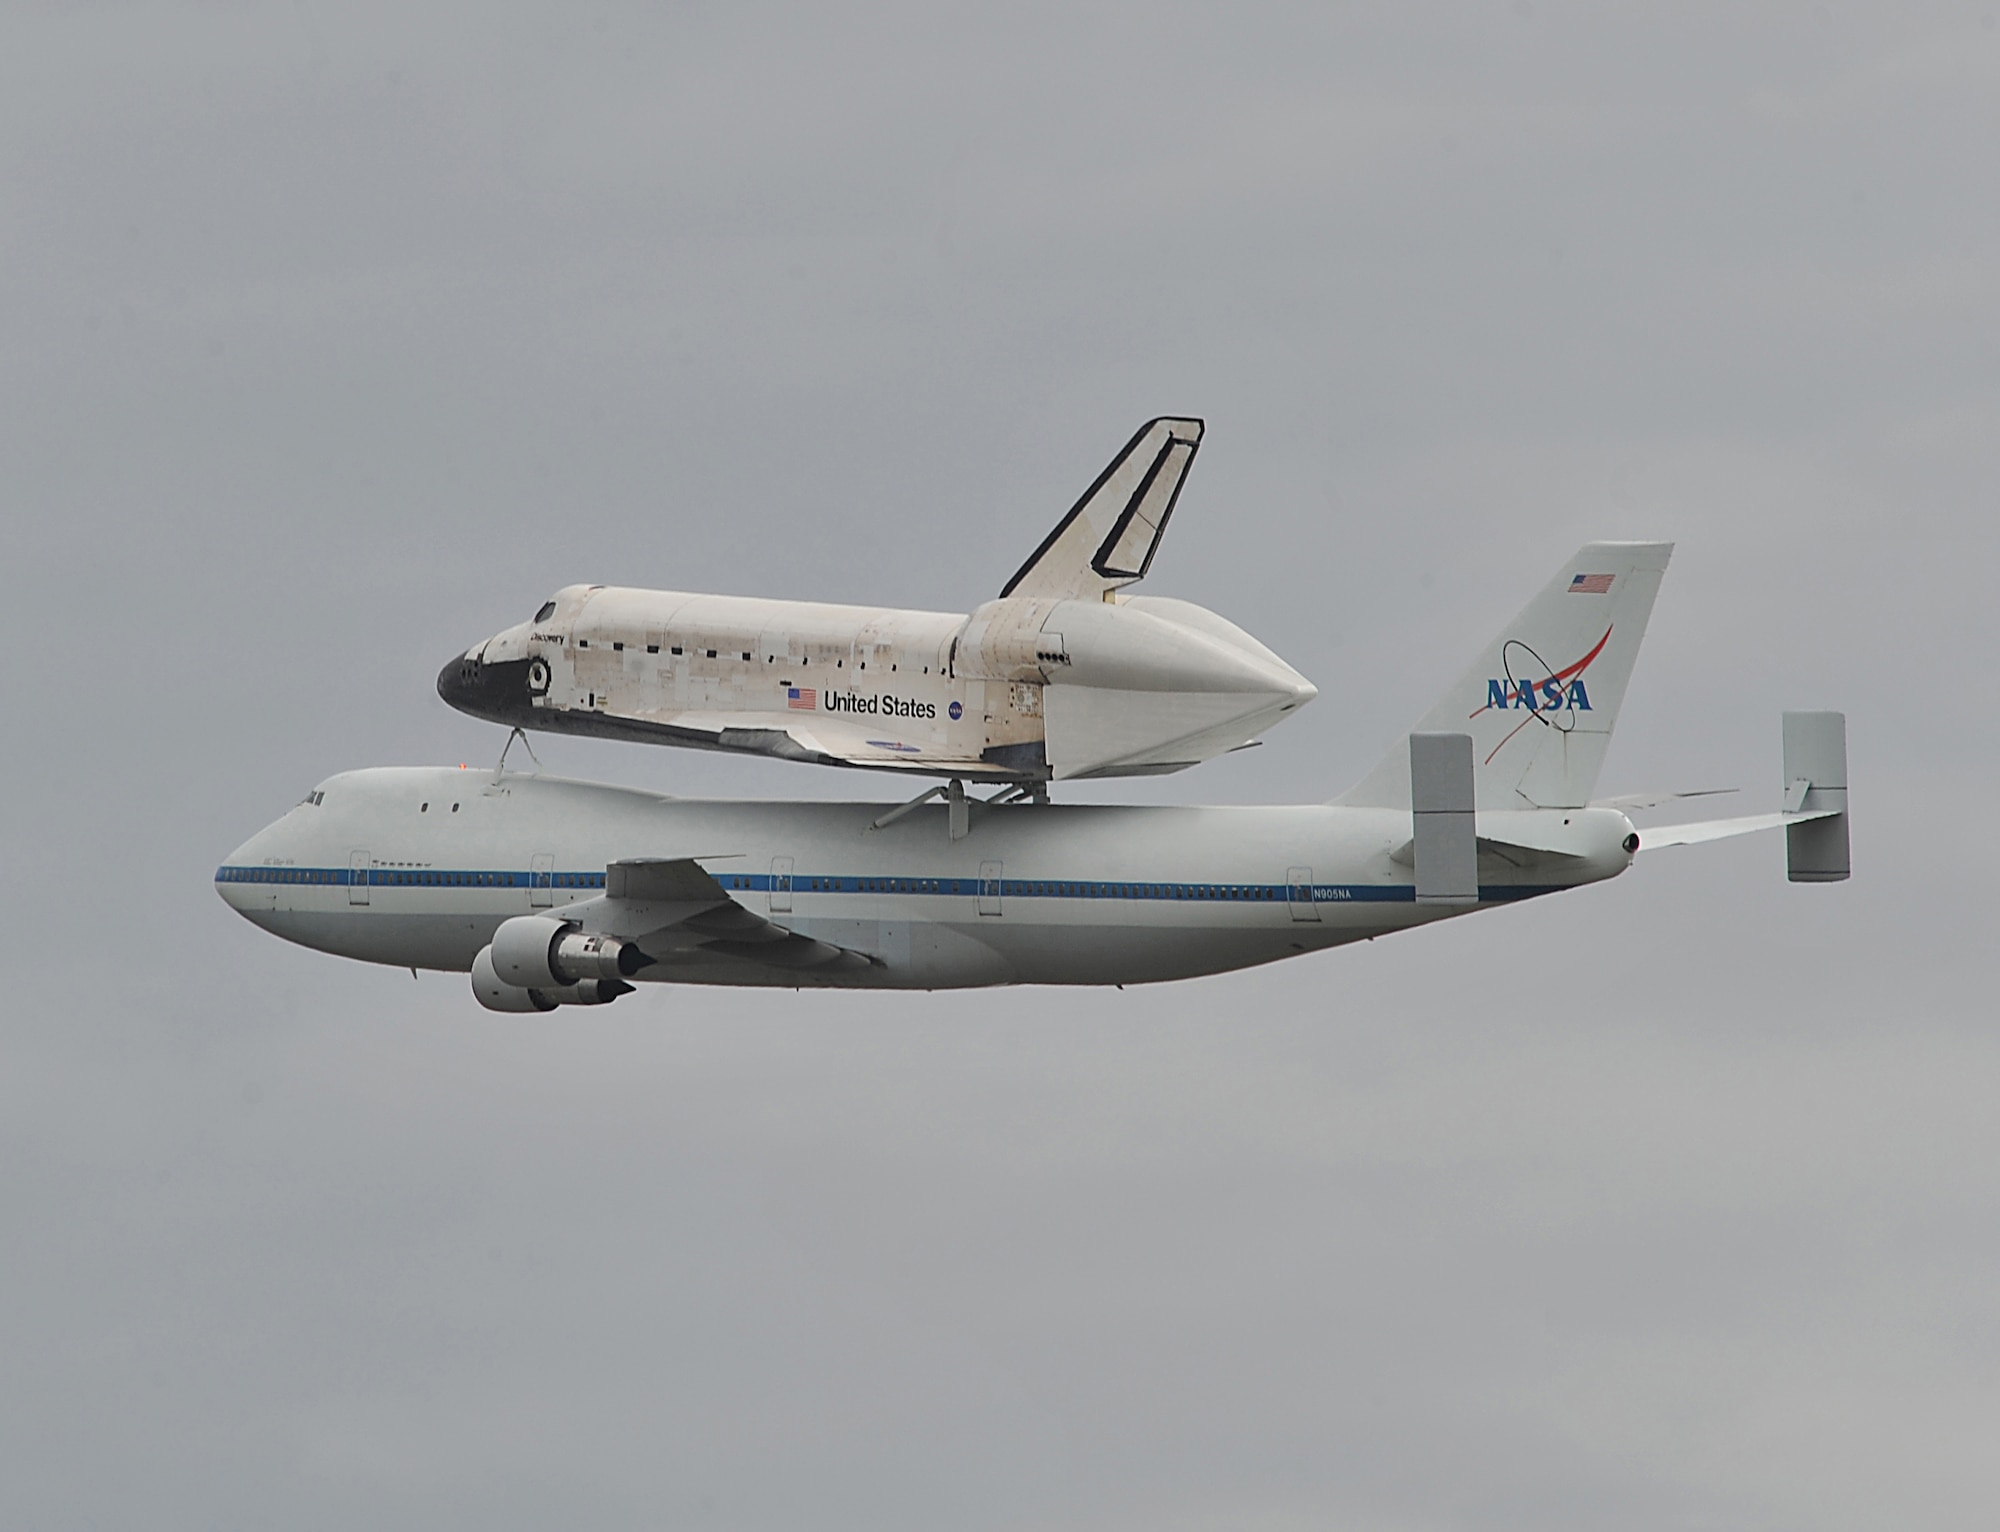 The space shuttle Discovery, sitting on top of a modified NASA Boeing 747 aircraft, flies over Washington Dulles International Airport in Dulles, Va., April 17, 2012. The Discovery made its final voyage to the Smithsonian National Air and Space Museum annex in Virginia. (U.S. Air Force photo by Val Gempis)